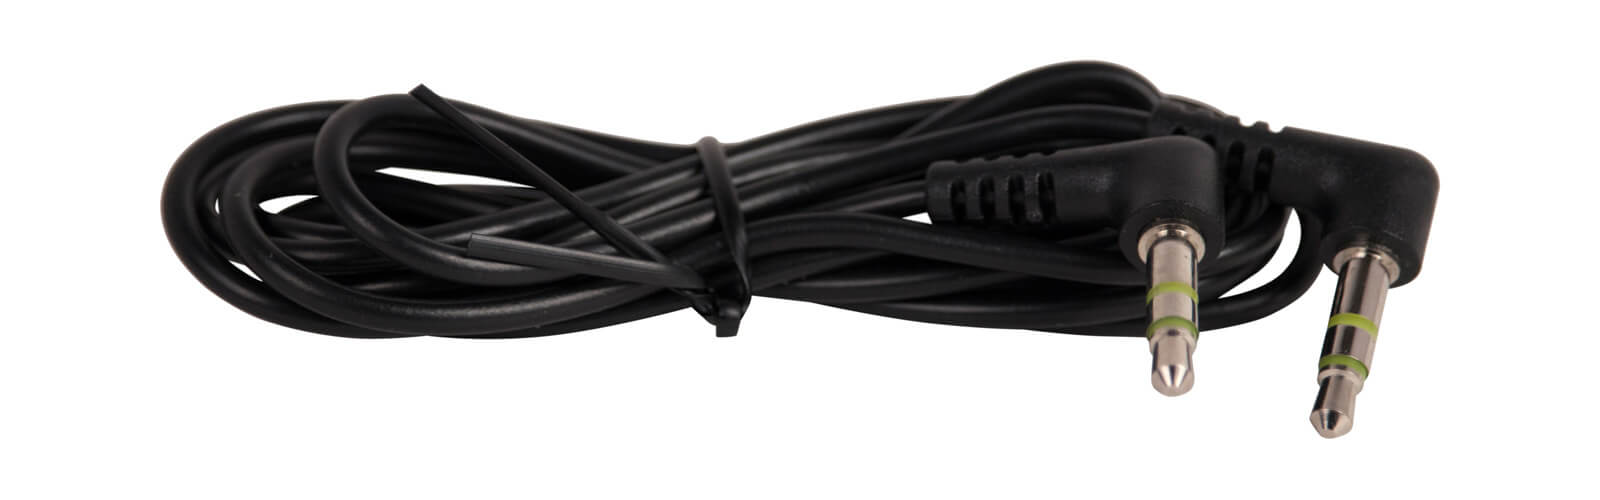 AUX cable for audio